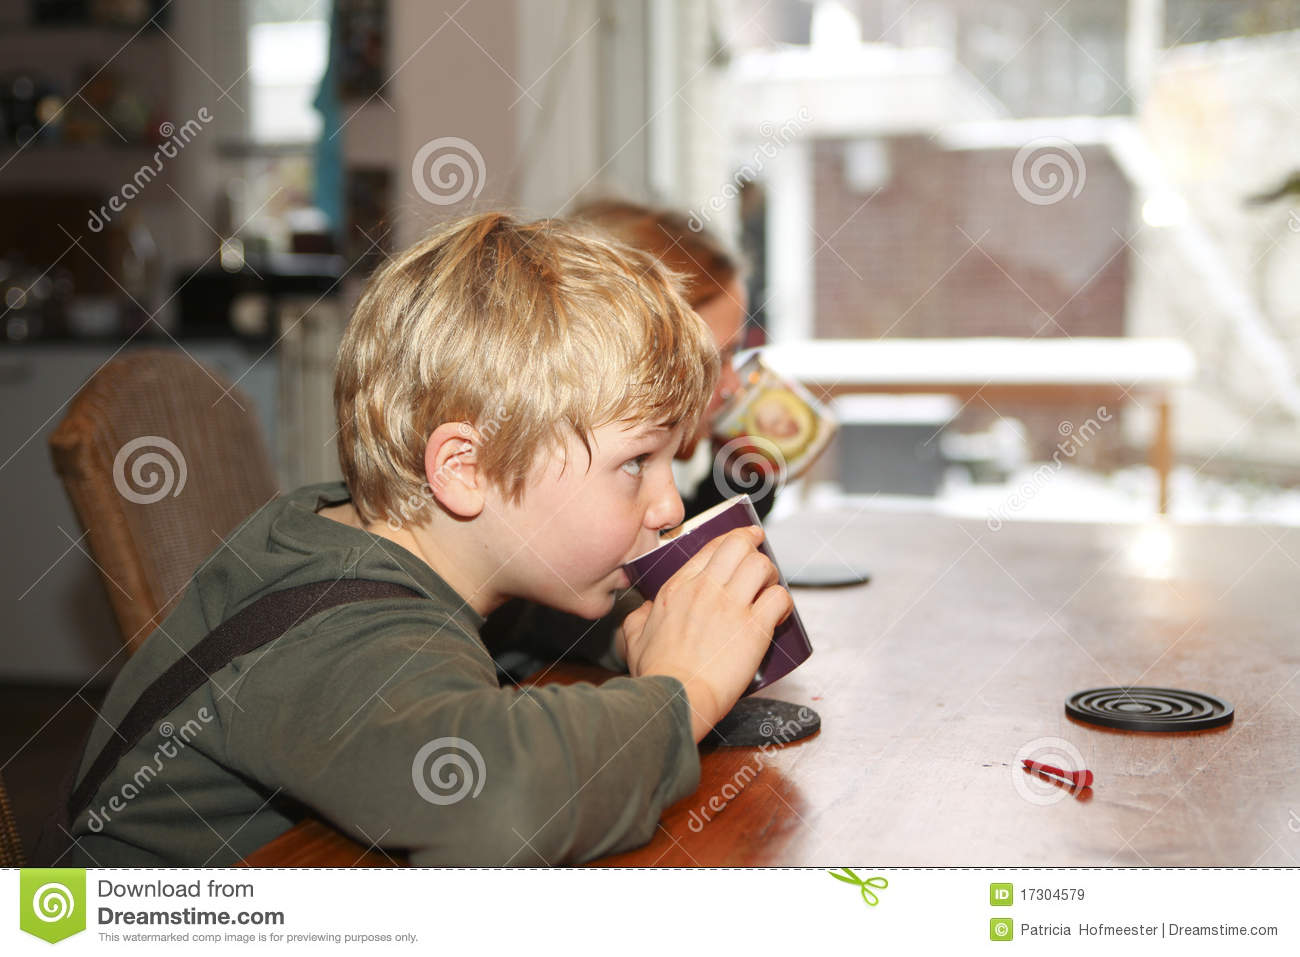 Boy And Girl Drinking Hot Chocolate Royalty Free Stock Images   Image    